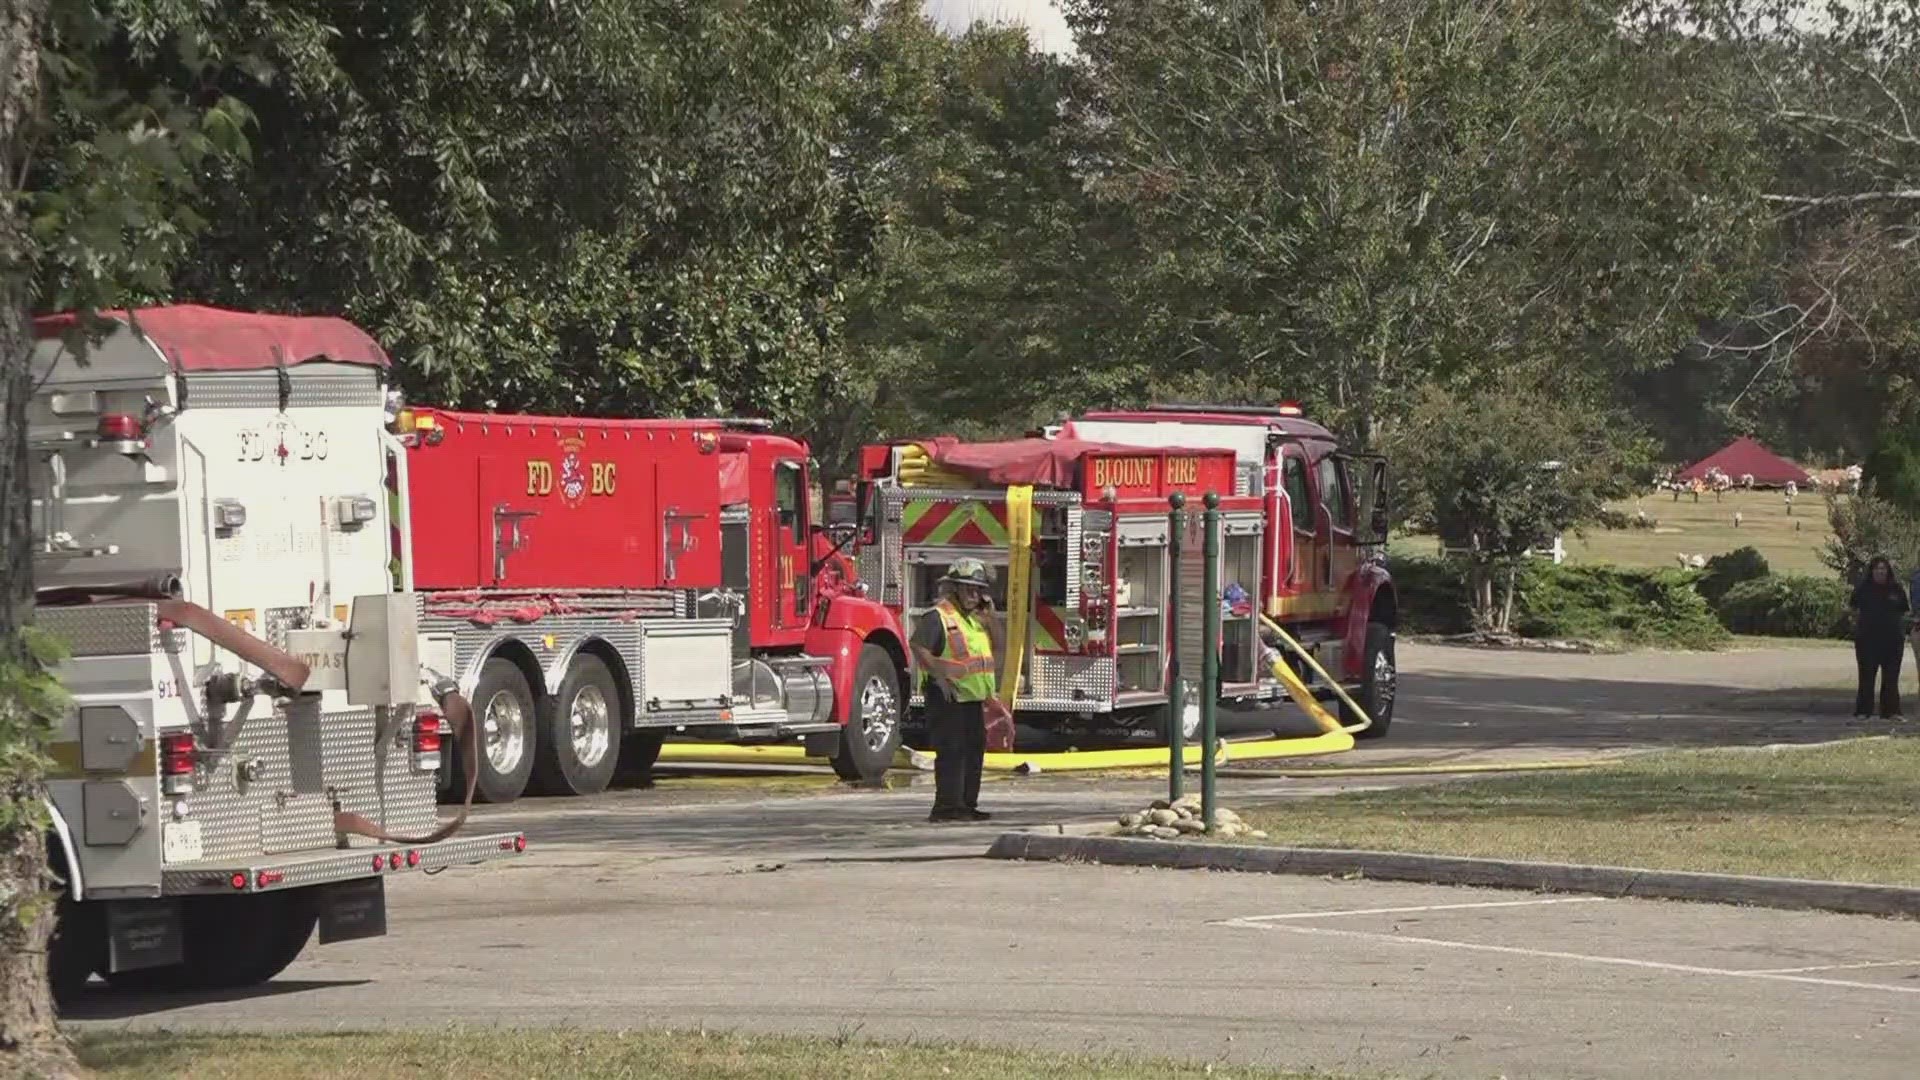 According to the Blount County Sheriff's Office, dispatch received a call around 2 p.m. of a fire at Grandview Cemetery.